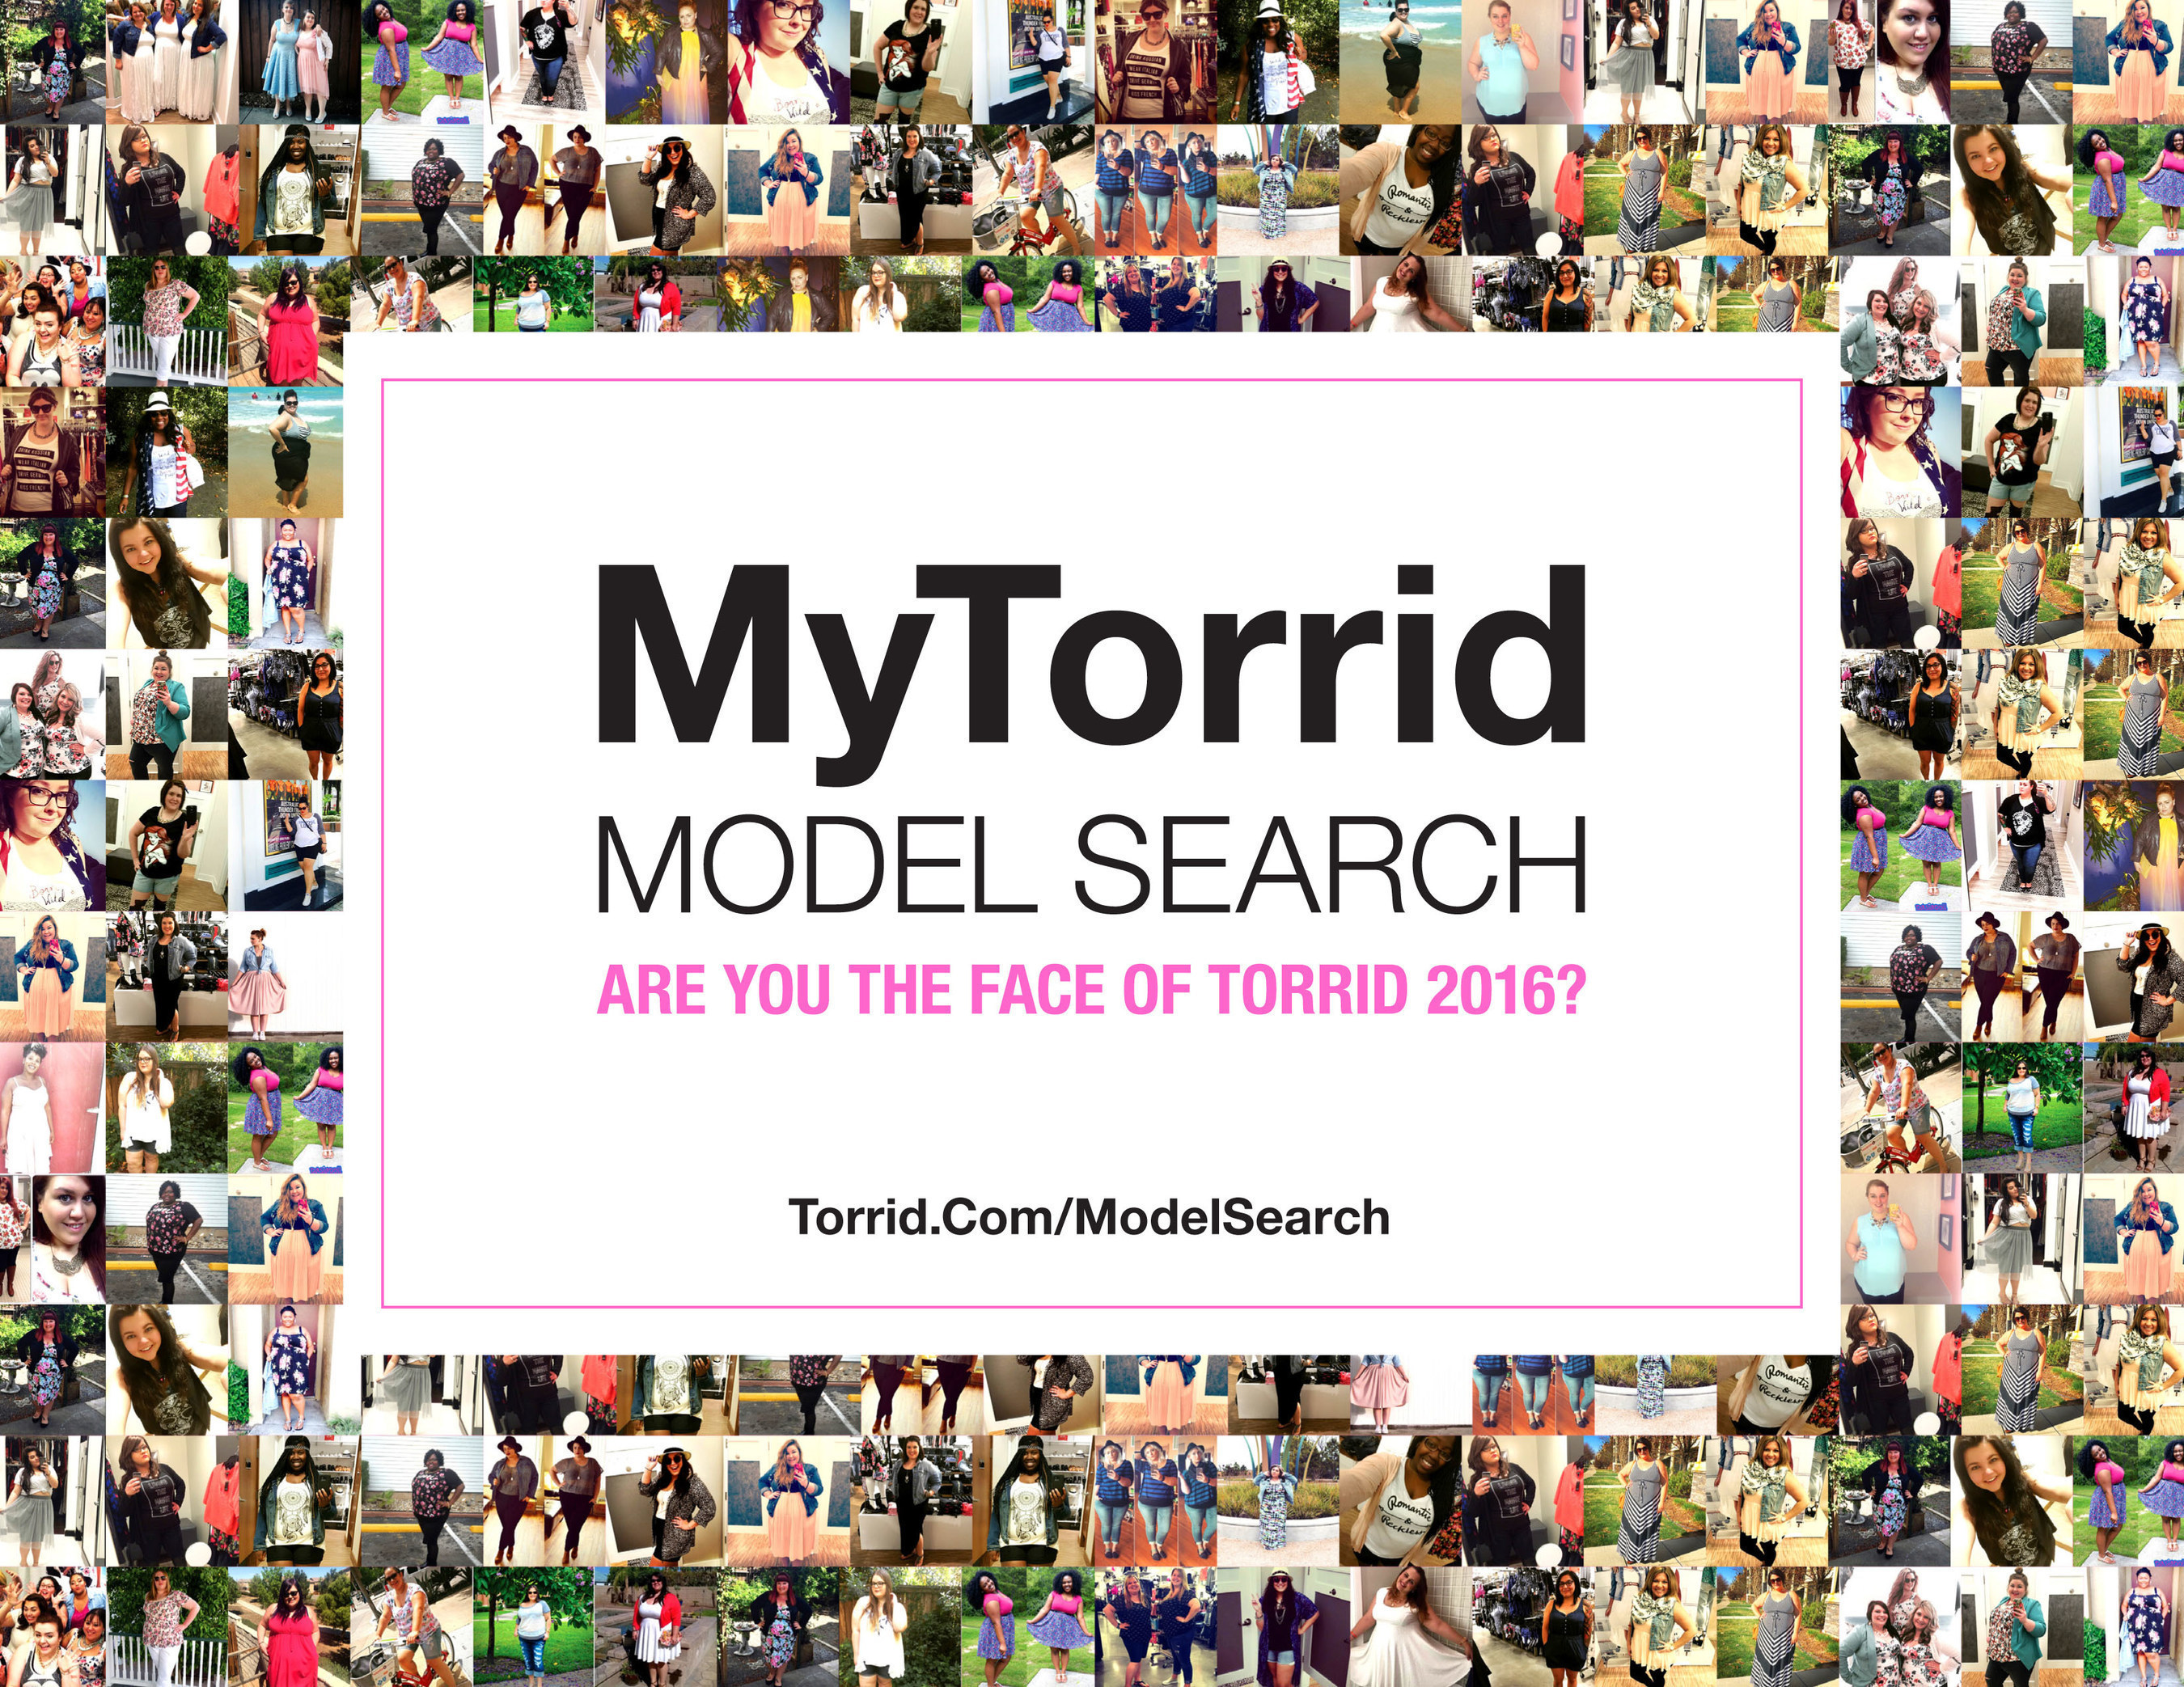 Torrid Launches National Model Search to discover the Face of Torrid 2016